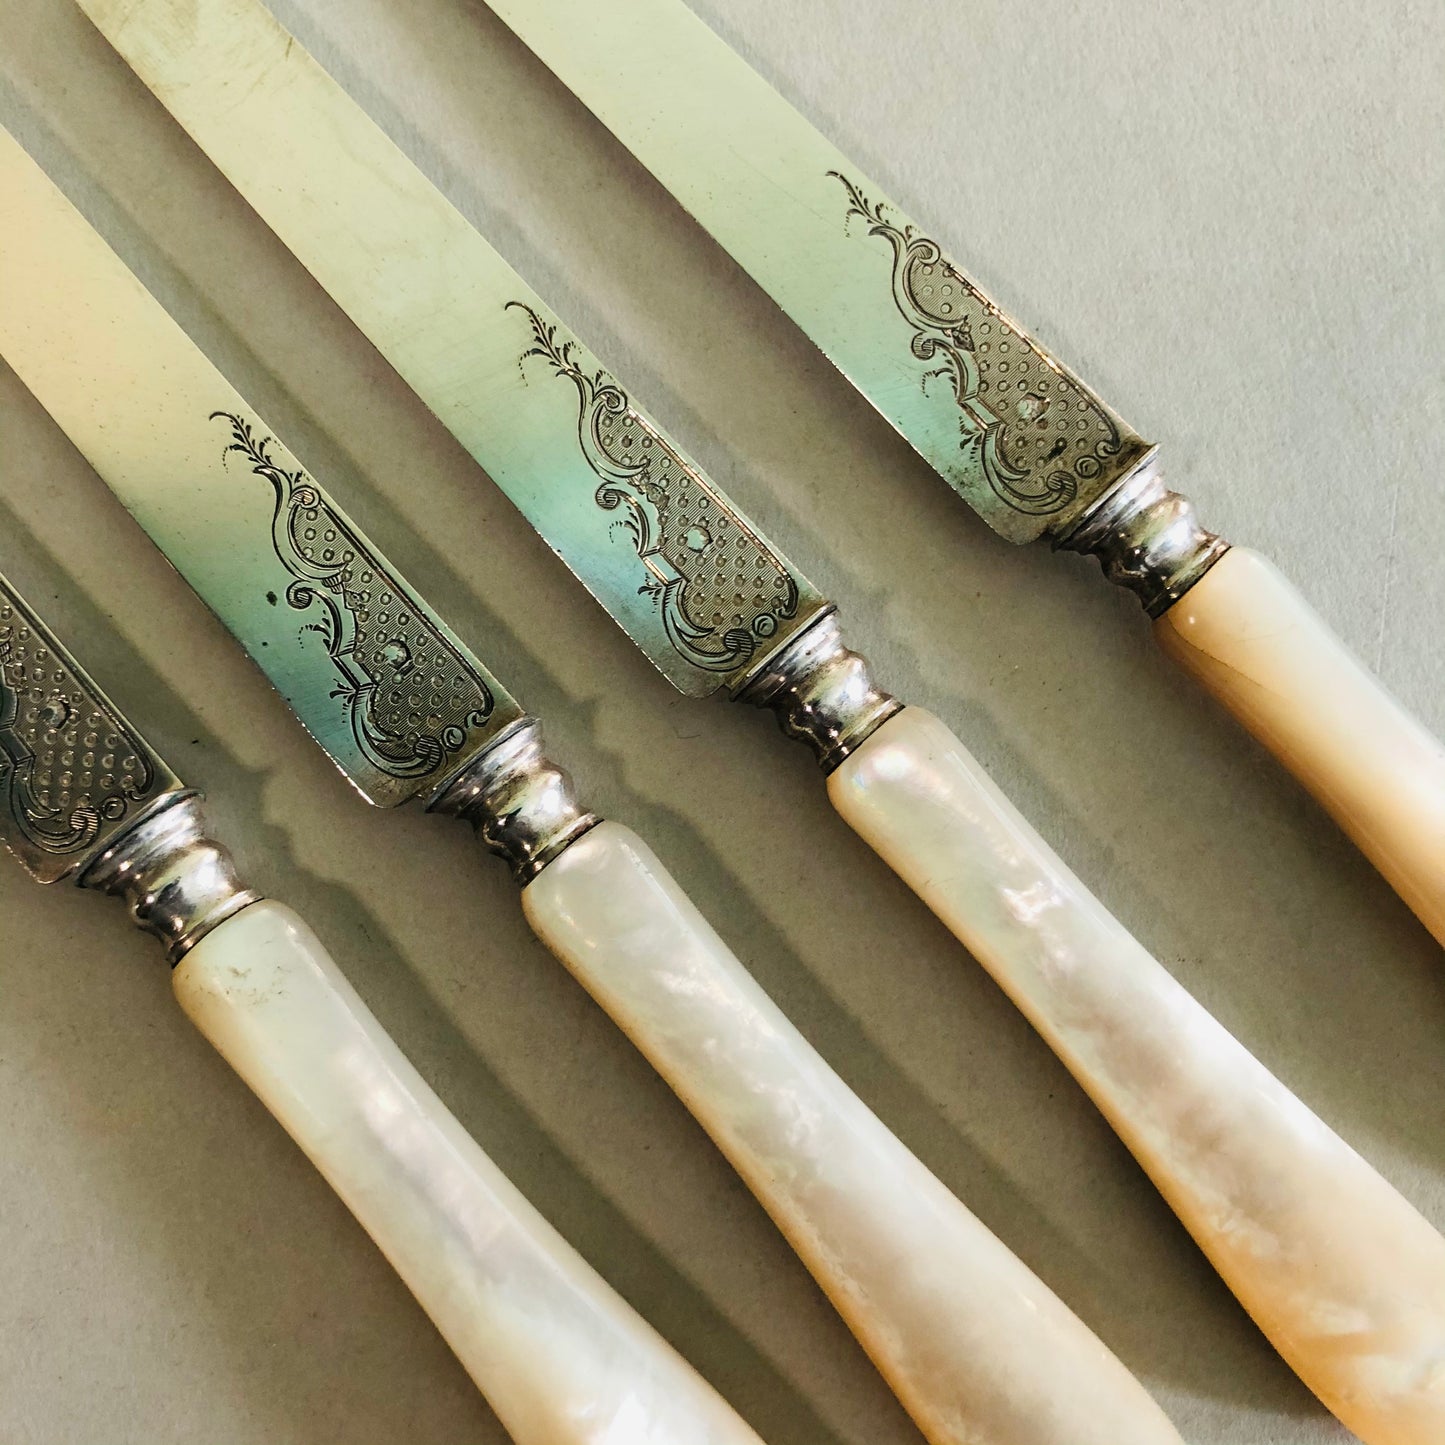 Antique Luxury Silver & Mother Of Pearl Knife | Luxury Flatware